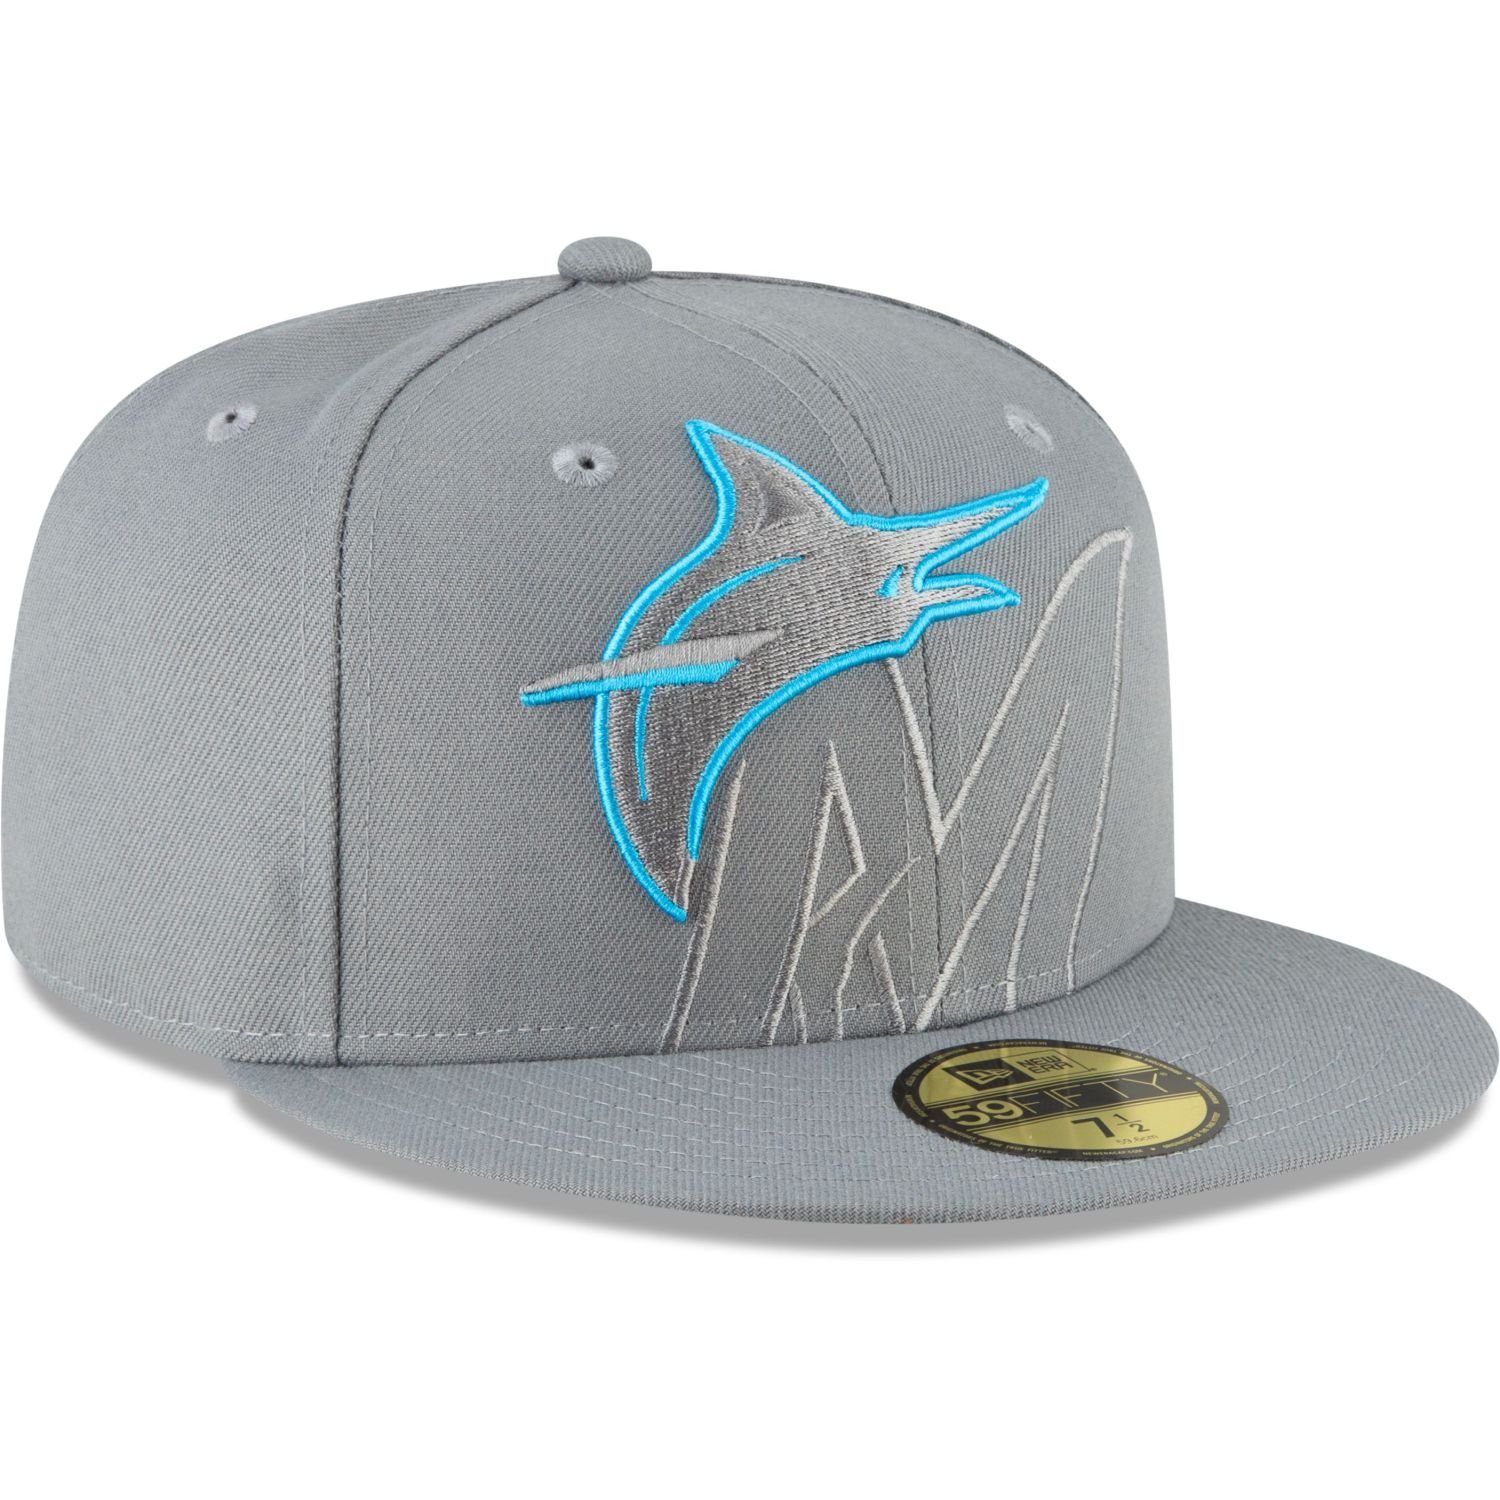 STORM Era Fitted Team New Cap MLB Cooperstown GREY Marlins Miami 59Fifty